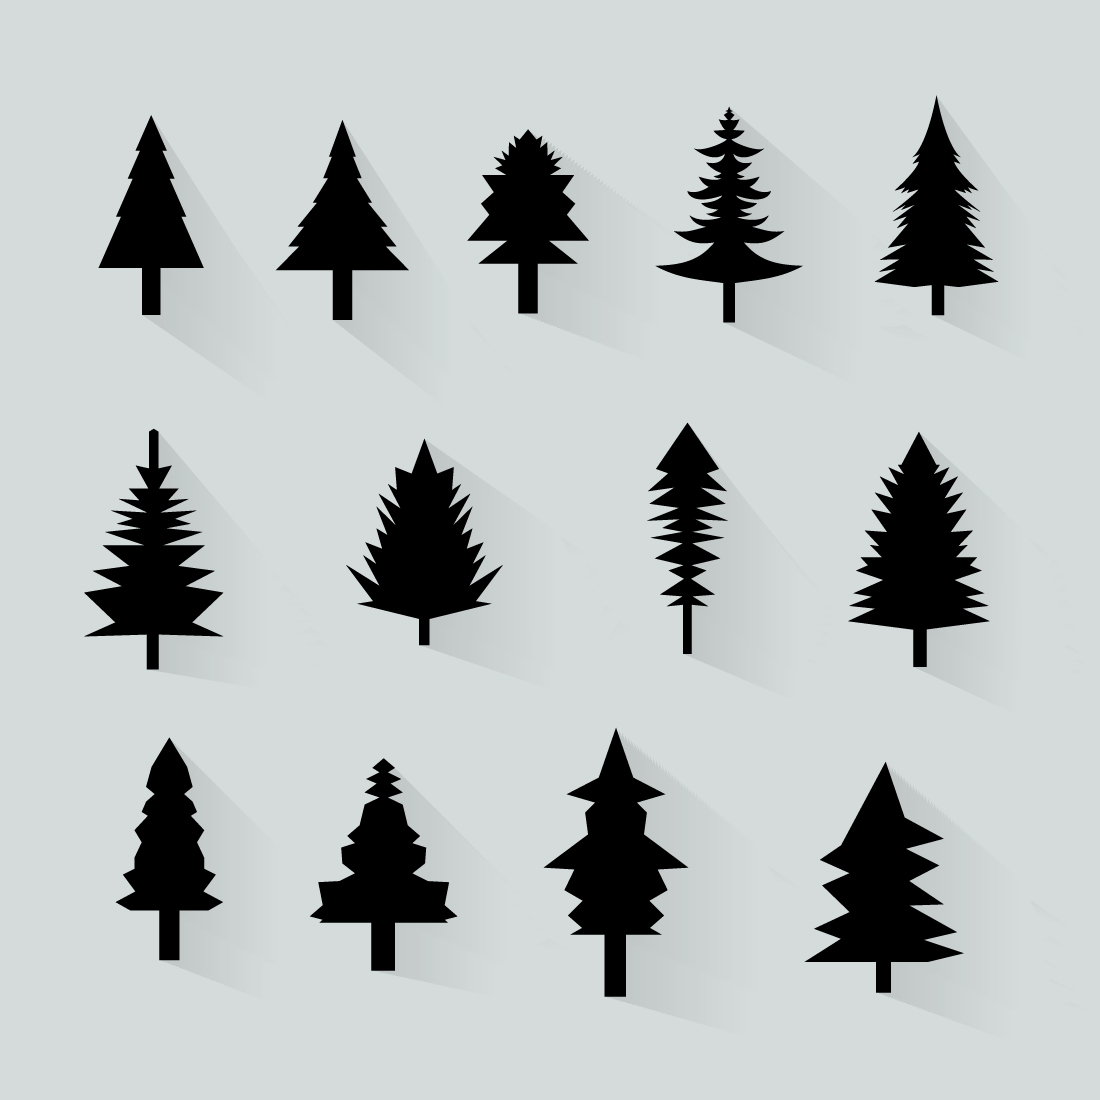 10+ Pine Tree Colorful Vectors & 10+ Pine Tree Silhouettes Vector cover image.